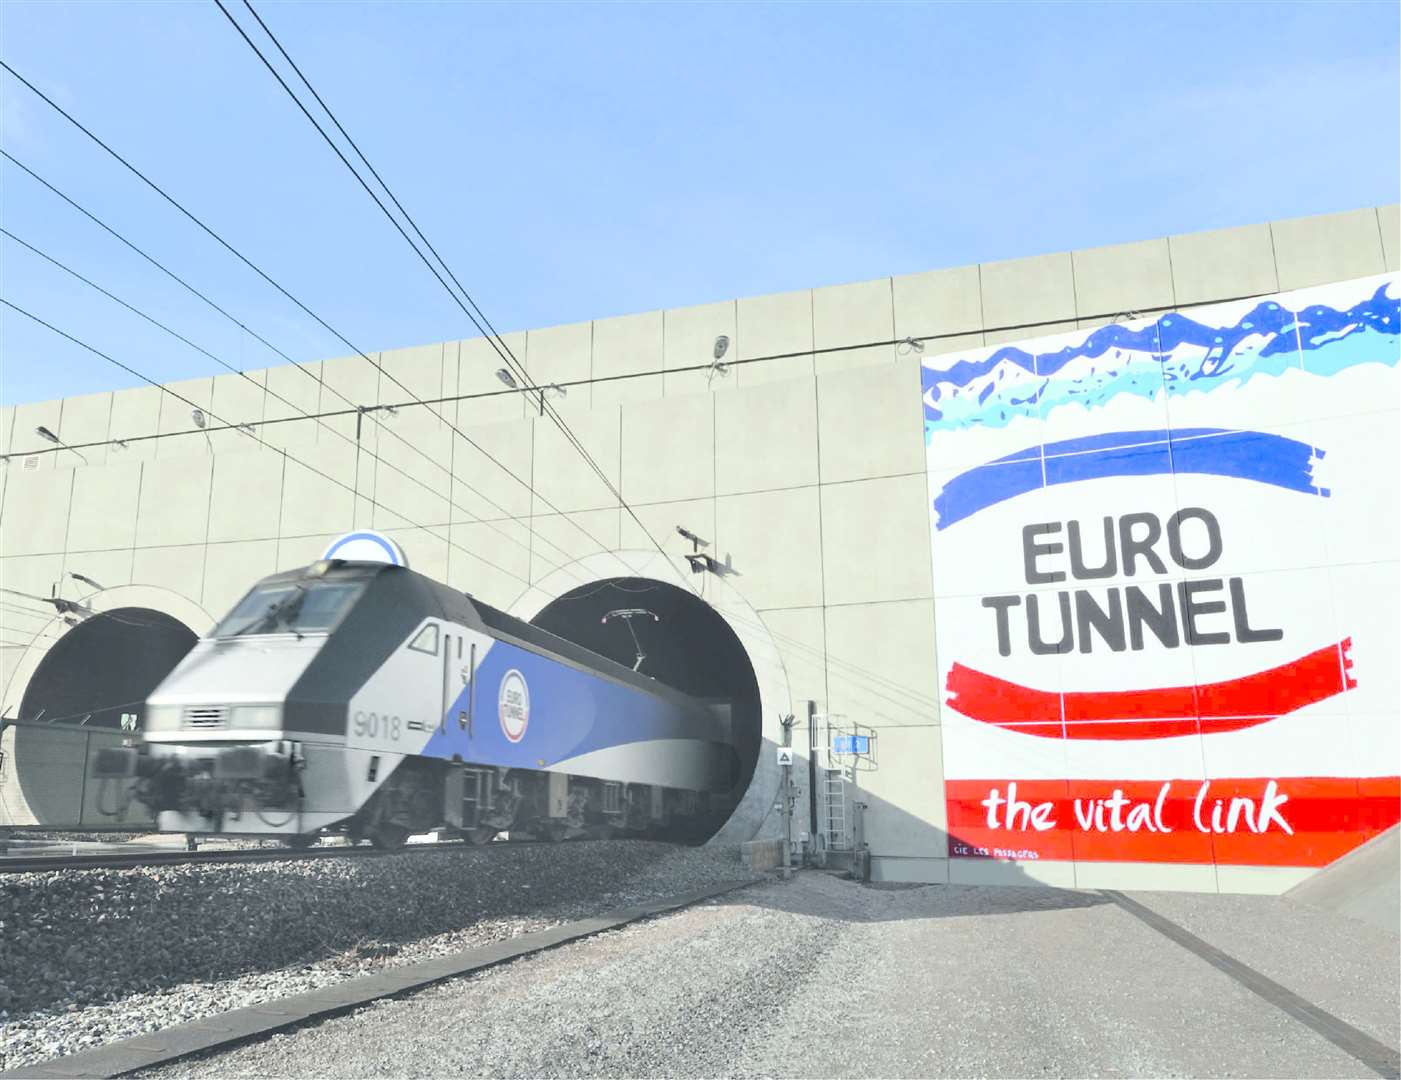 Eurotunnel suffered big losses due to the pandemic and Brexit - but is on track to recovery